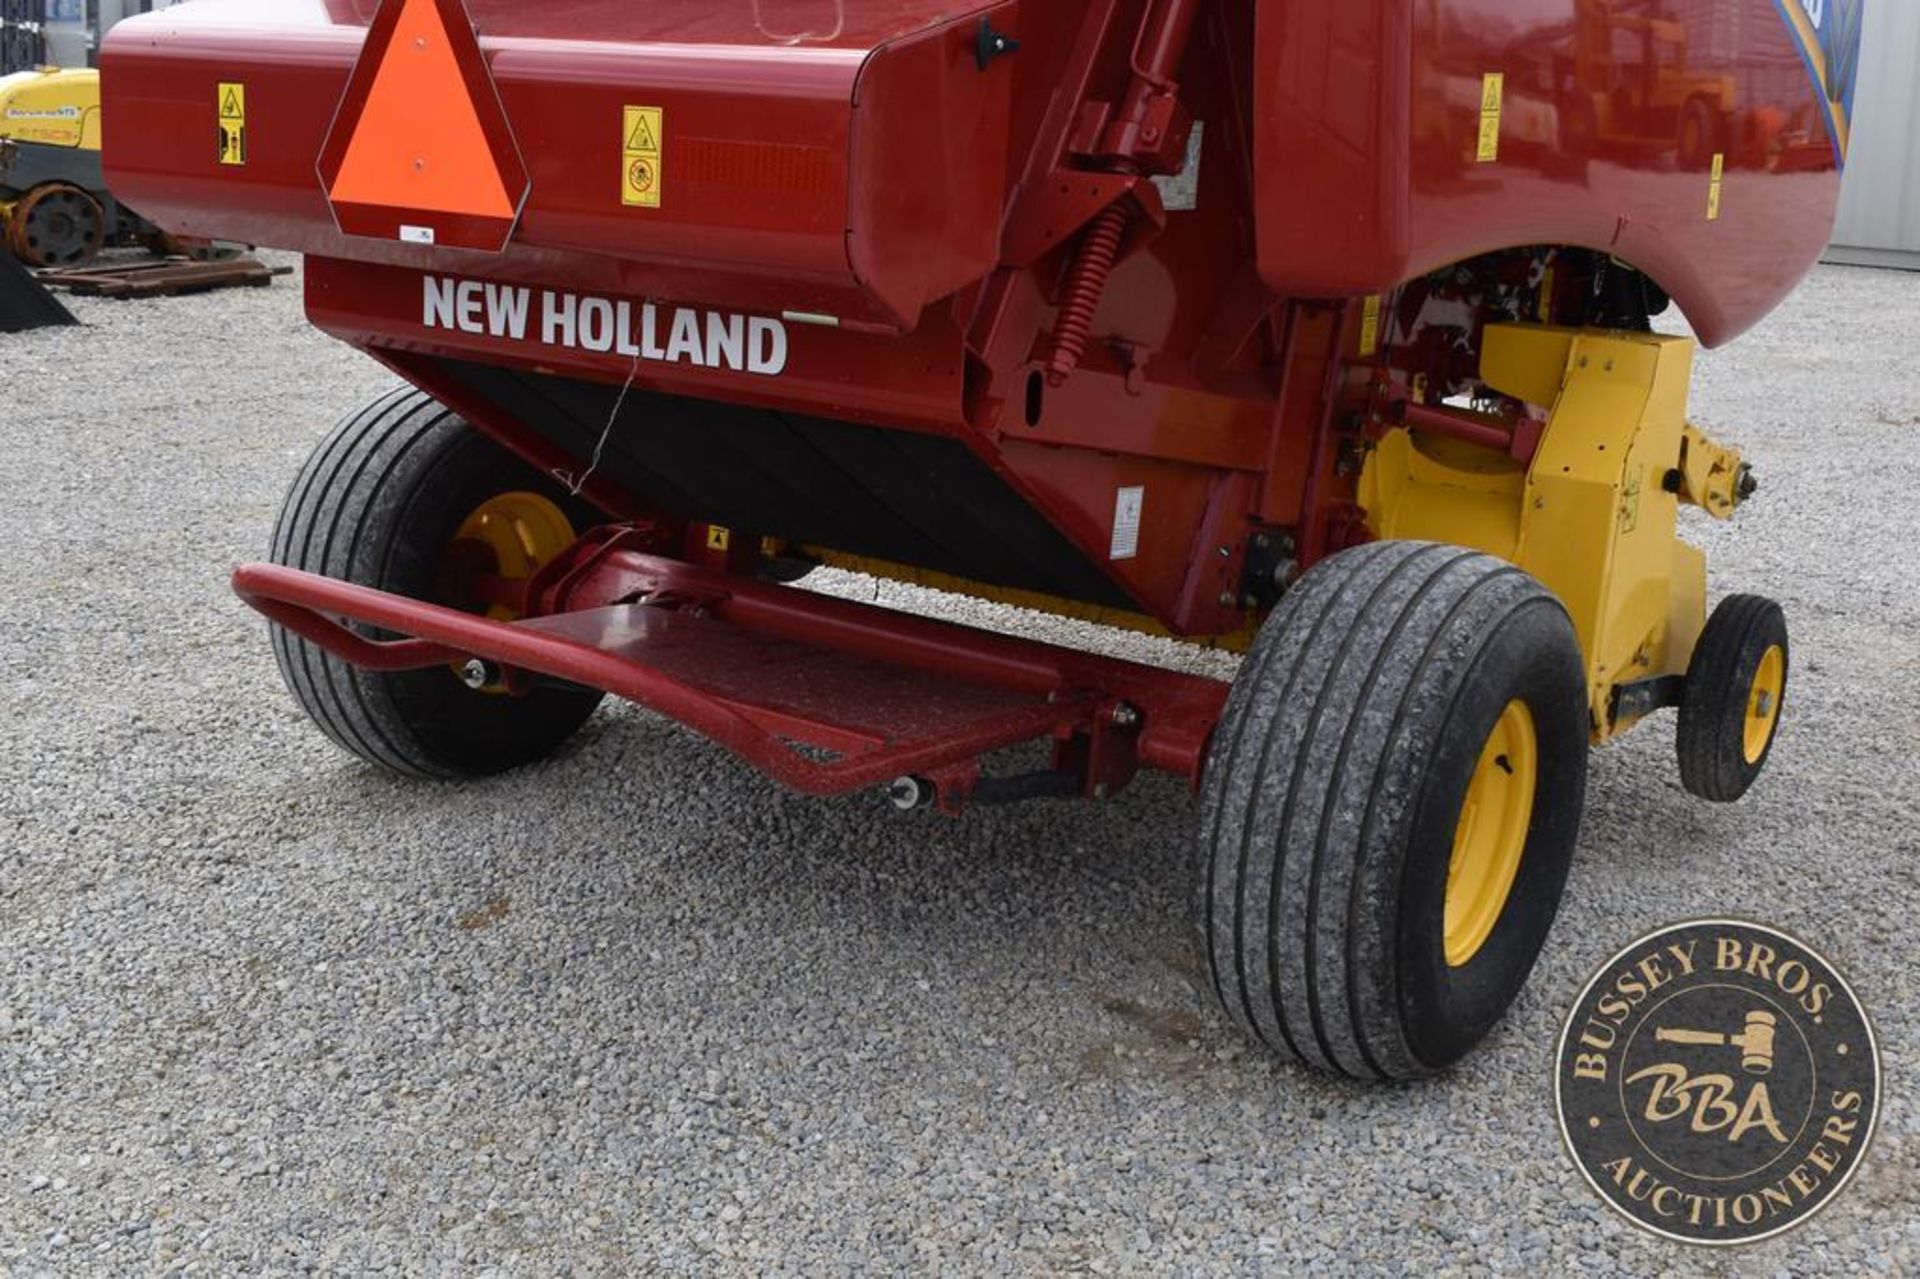 2020 NEW HOLLAND ROLL-BELT 450 26101 - Image 49 of 54